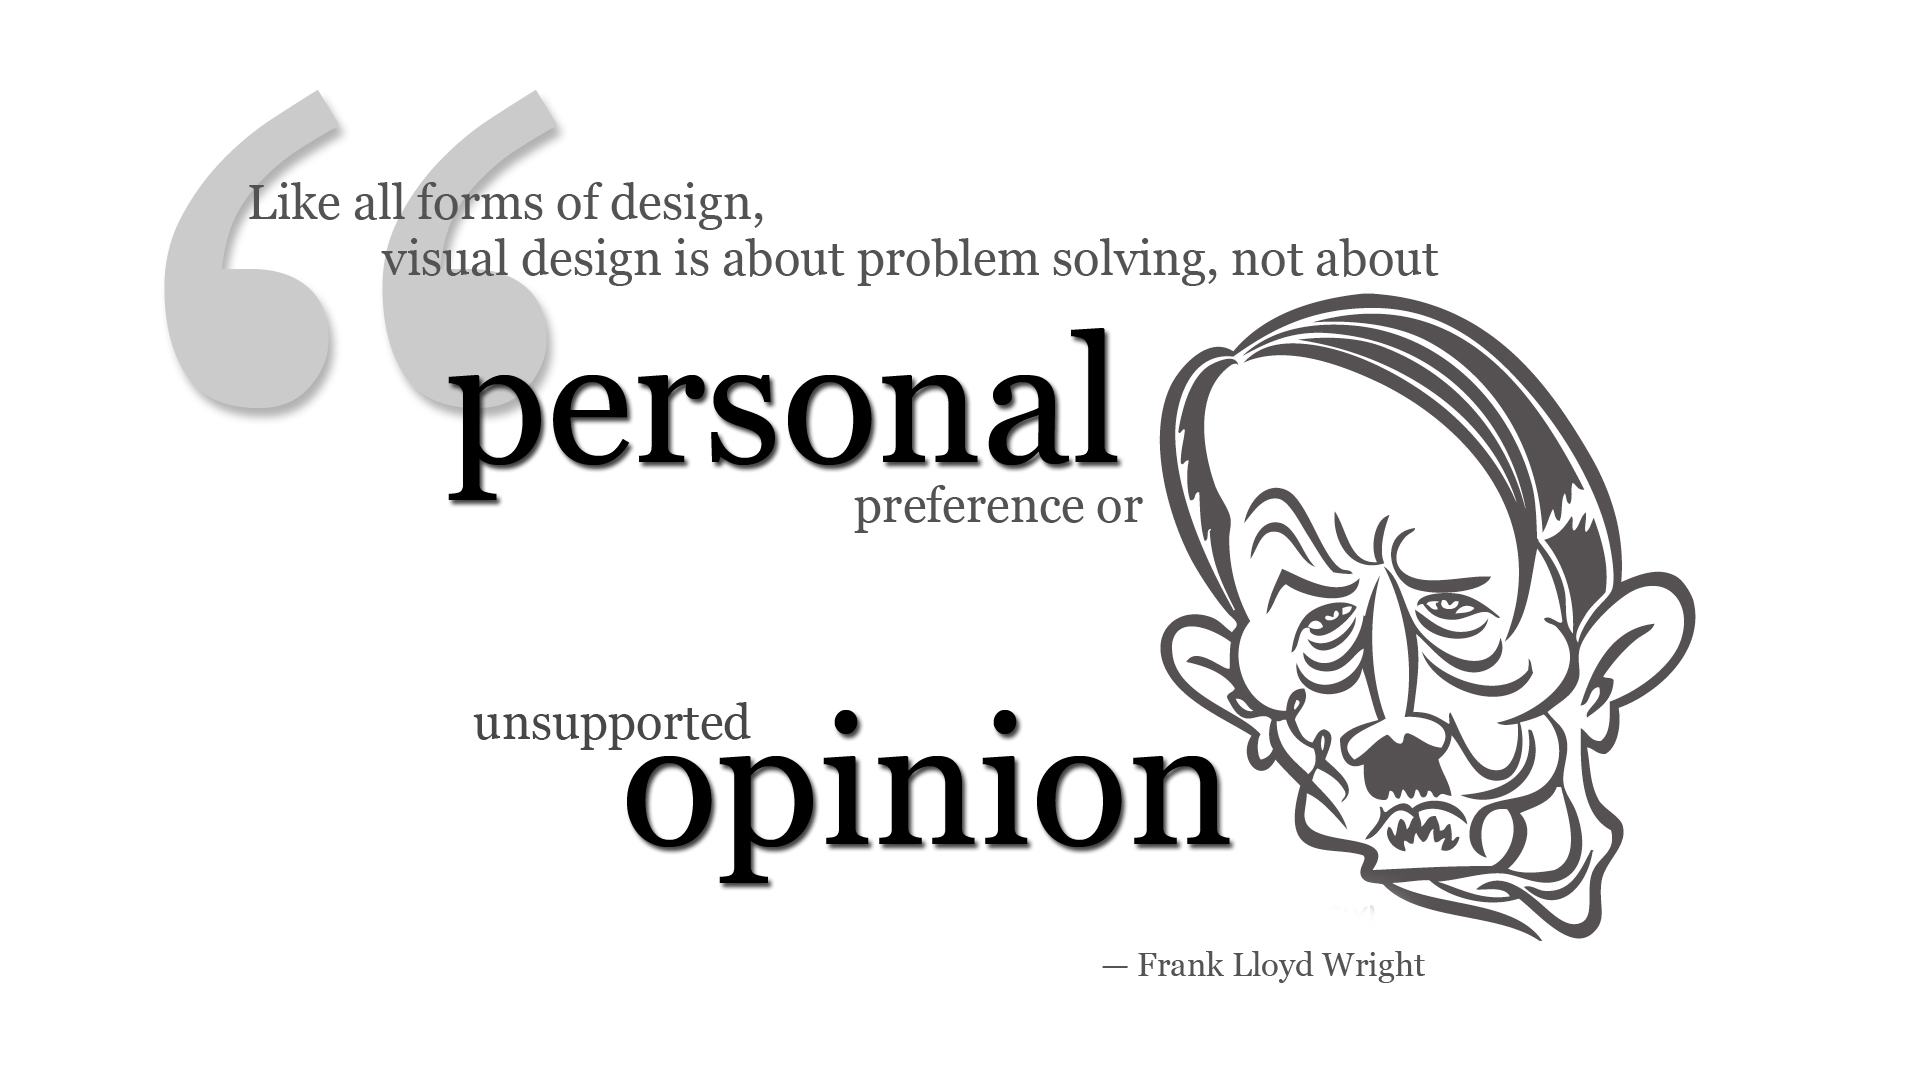 Like all forms of design, visual design is about problem  solving, not about personal preference or unsupported  opinion. Frank Lloyd Wright